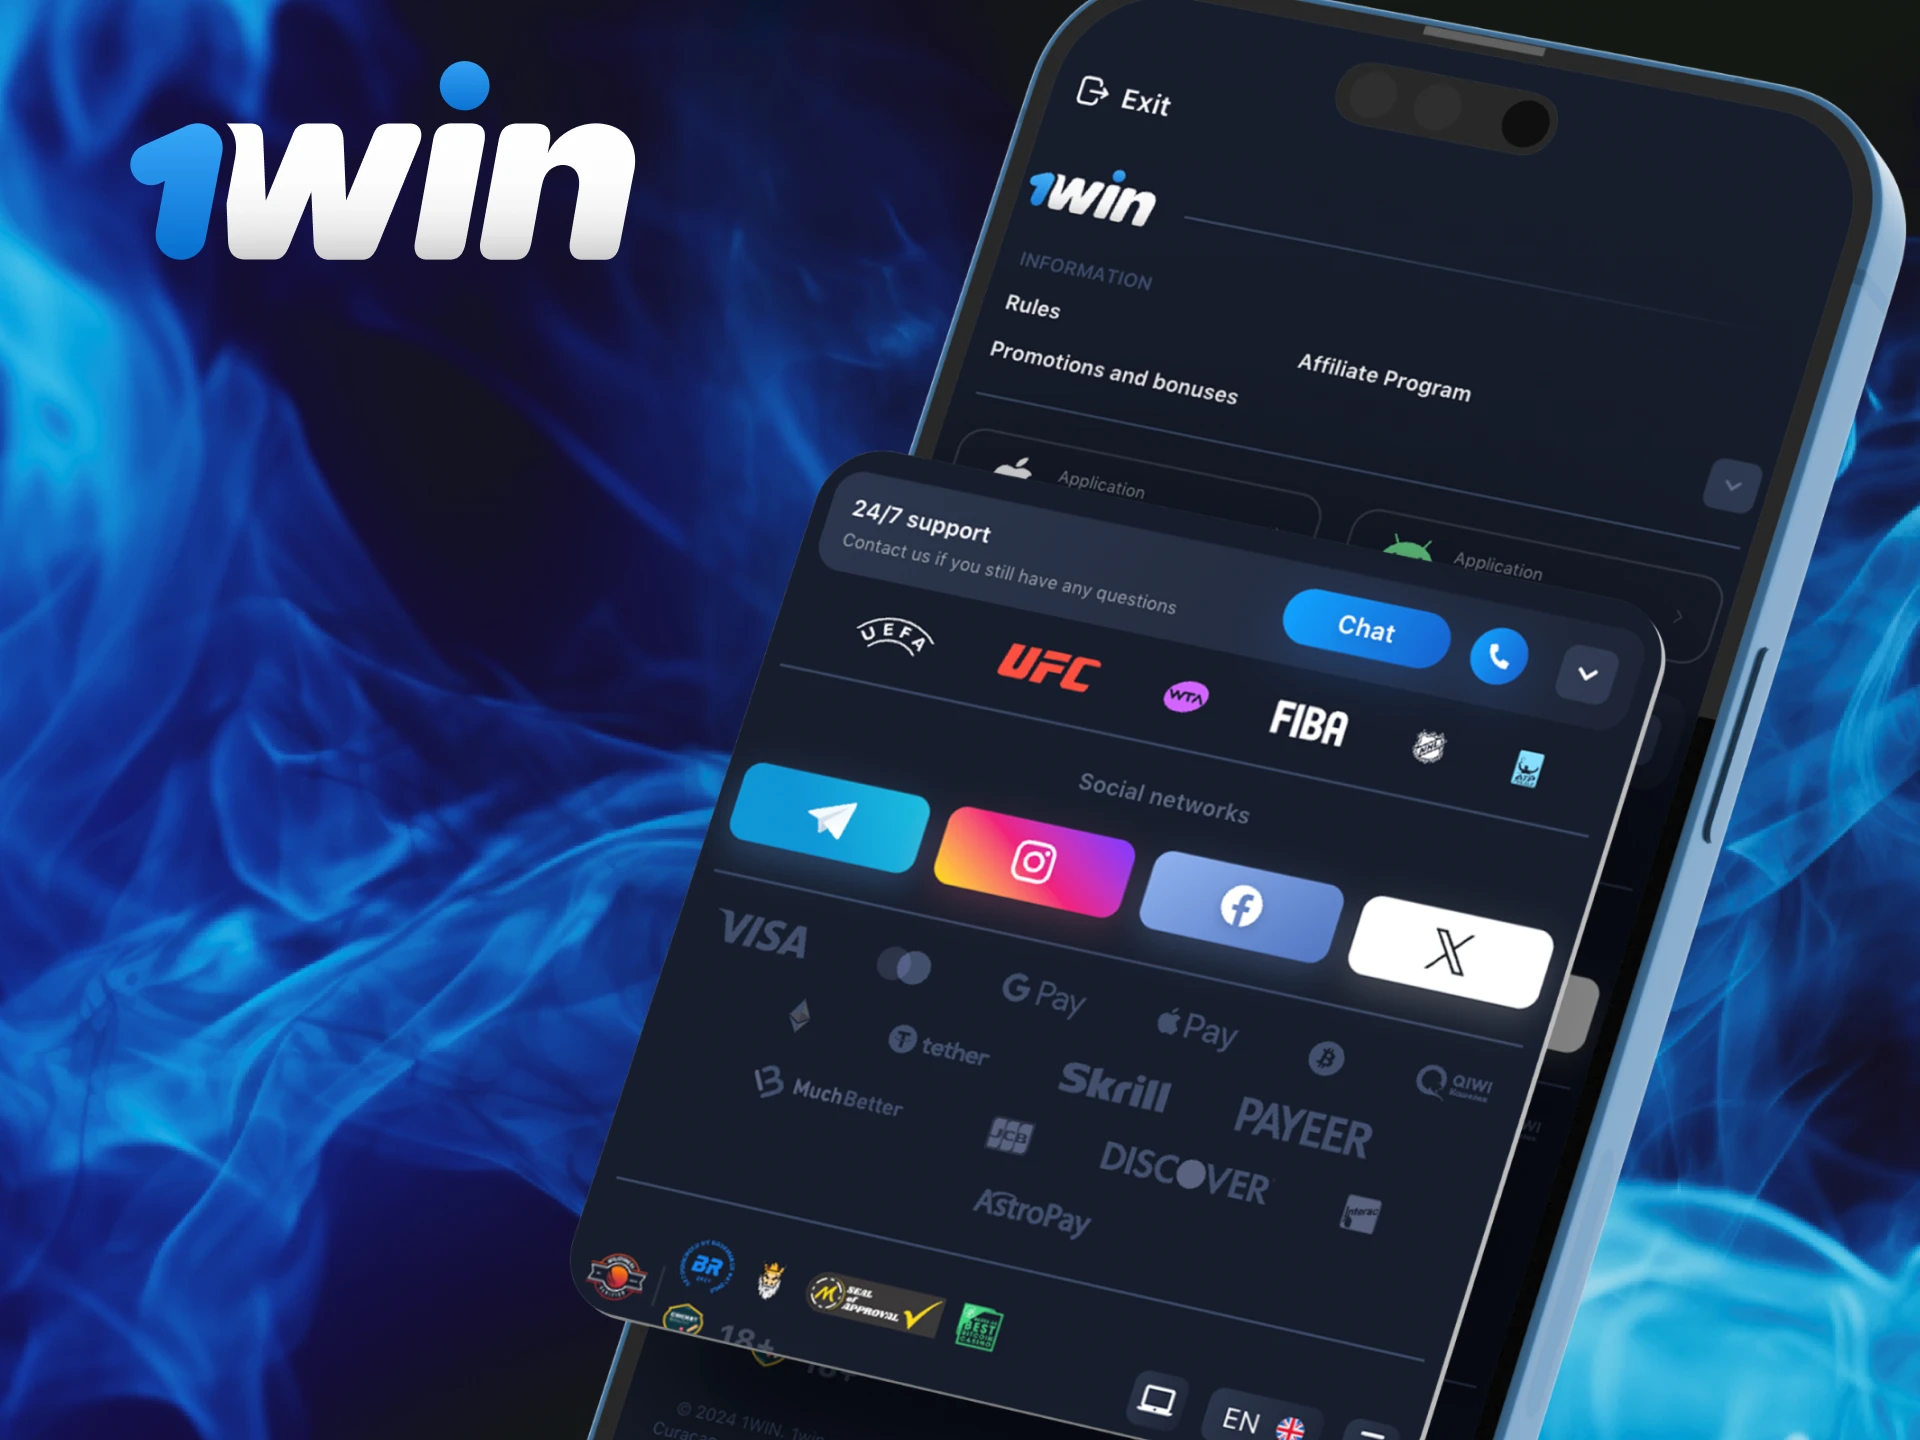 What are the payment methods in the 1Win casino mobile app.